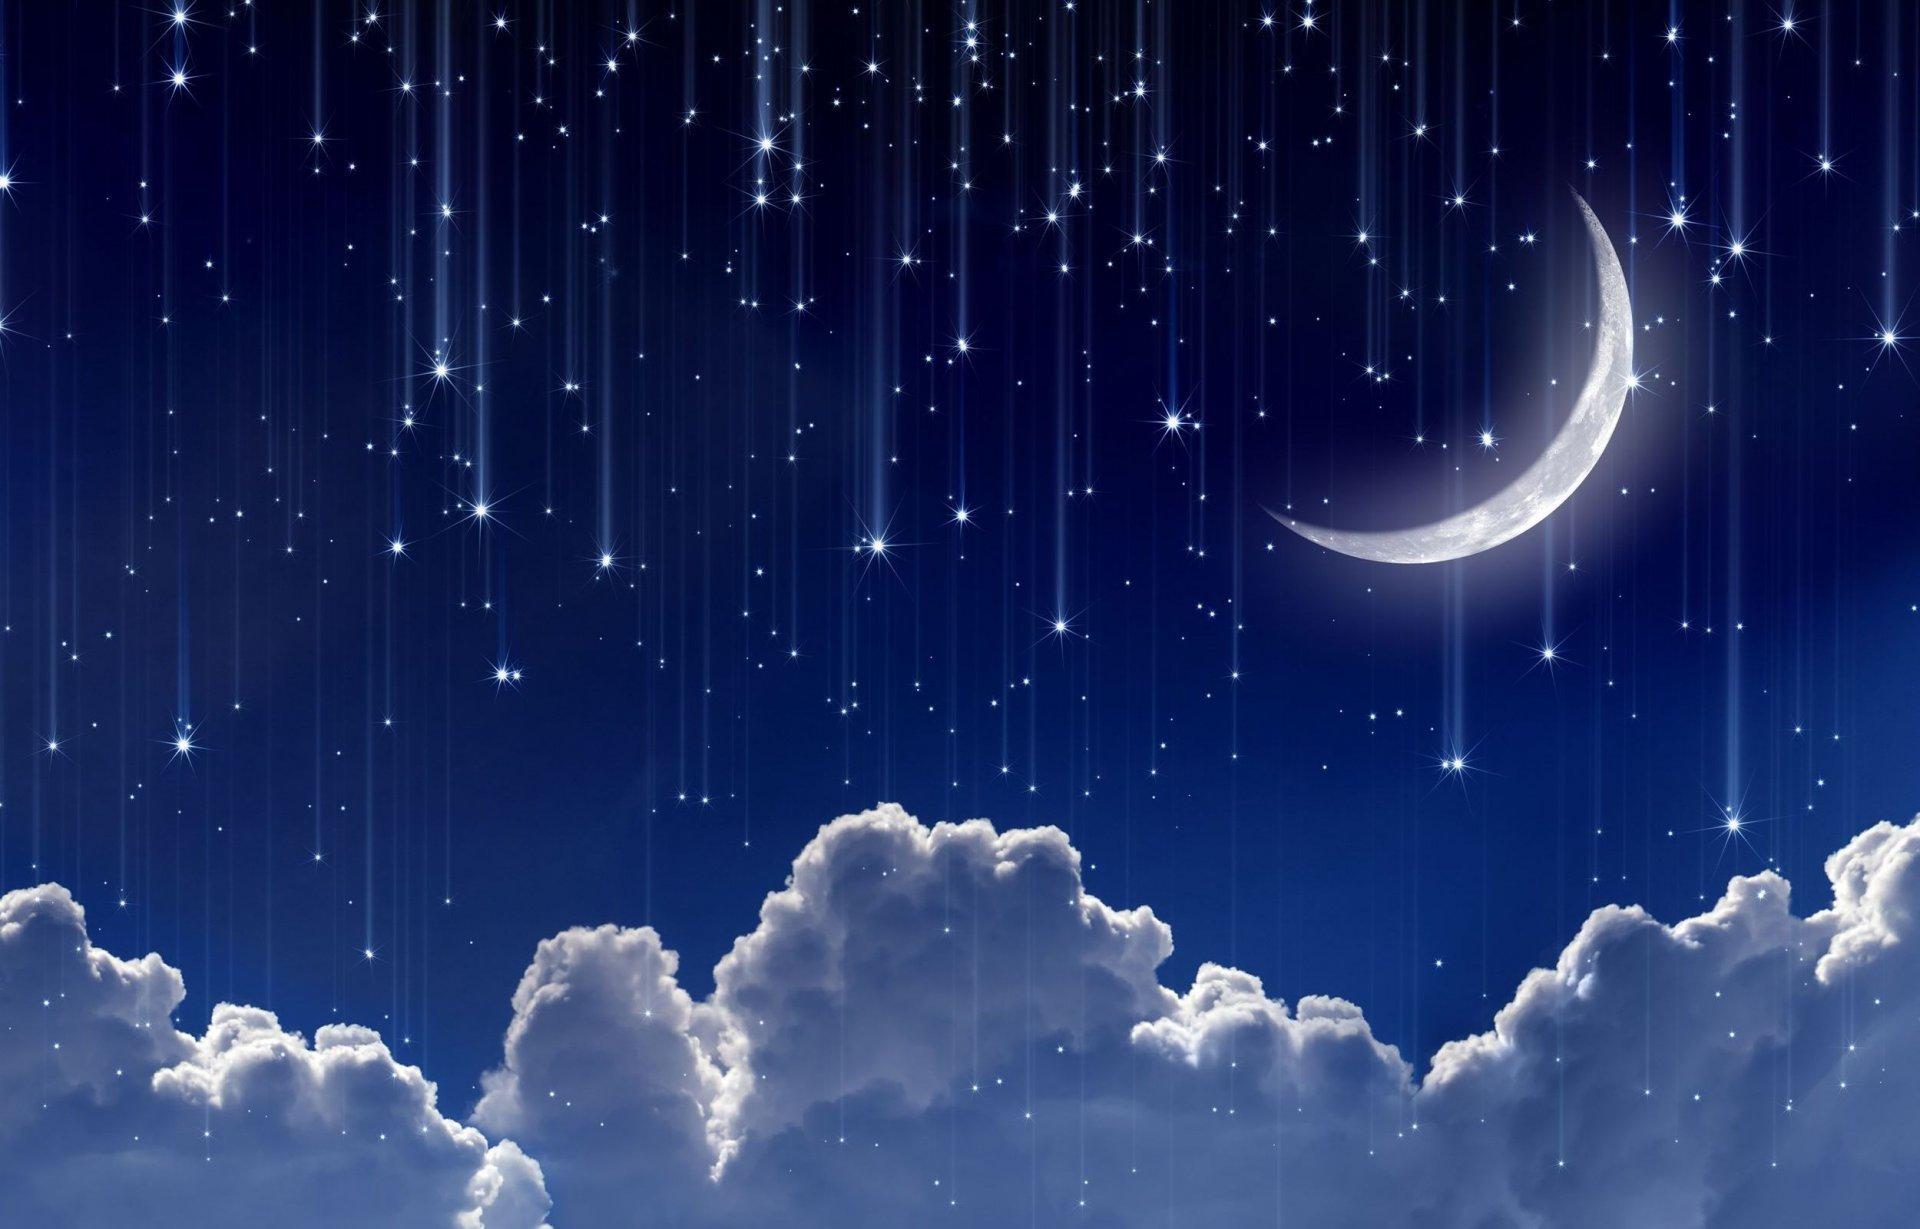 space moon year crescent sky clouds star stars lights night